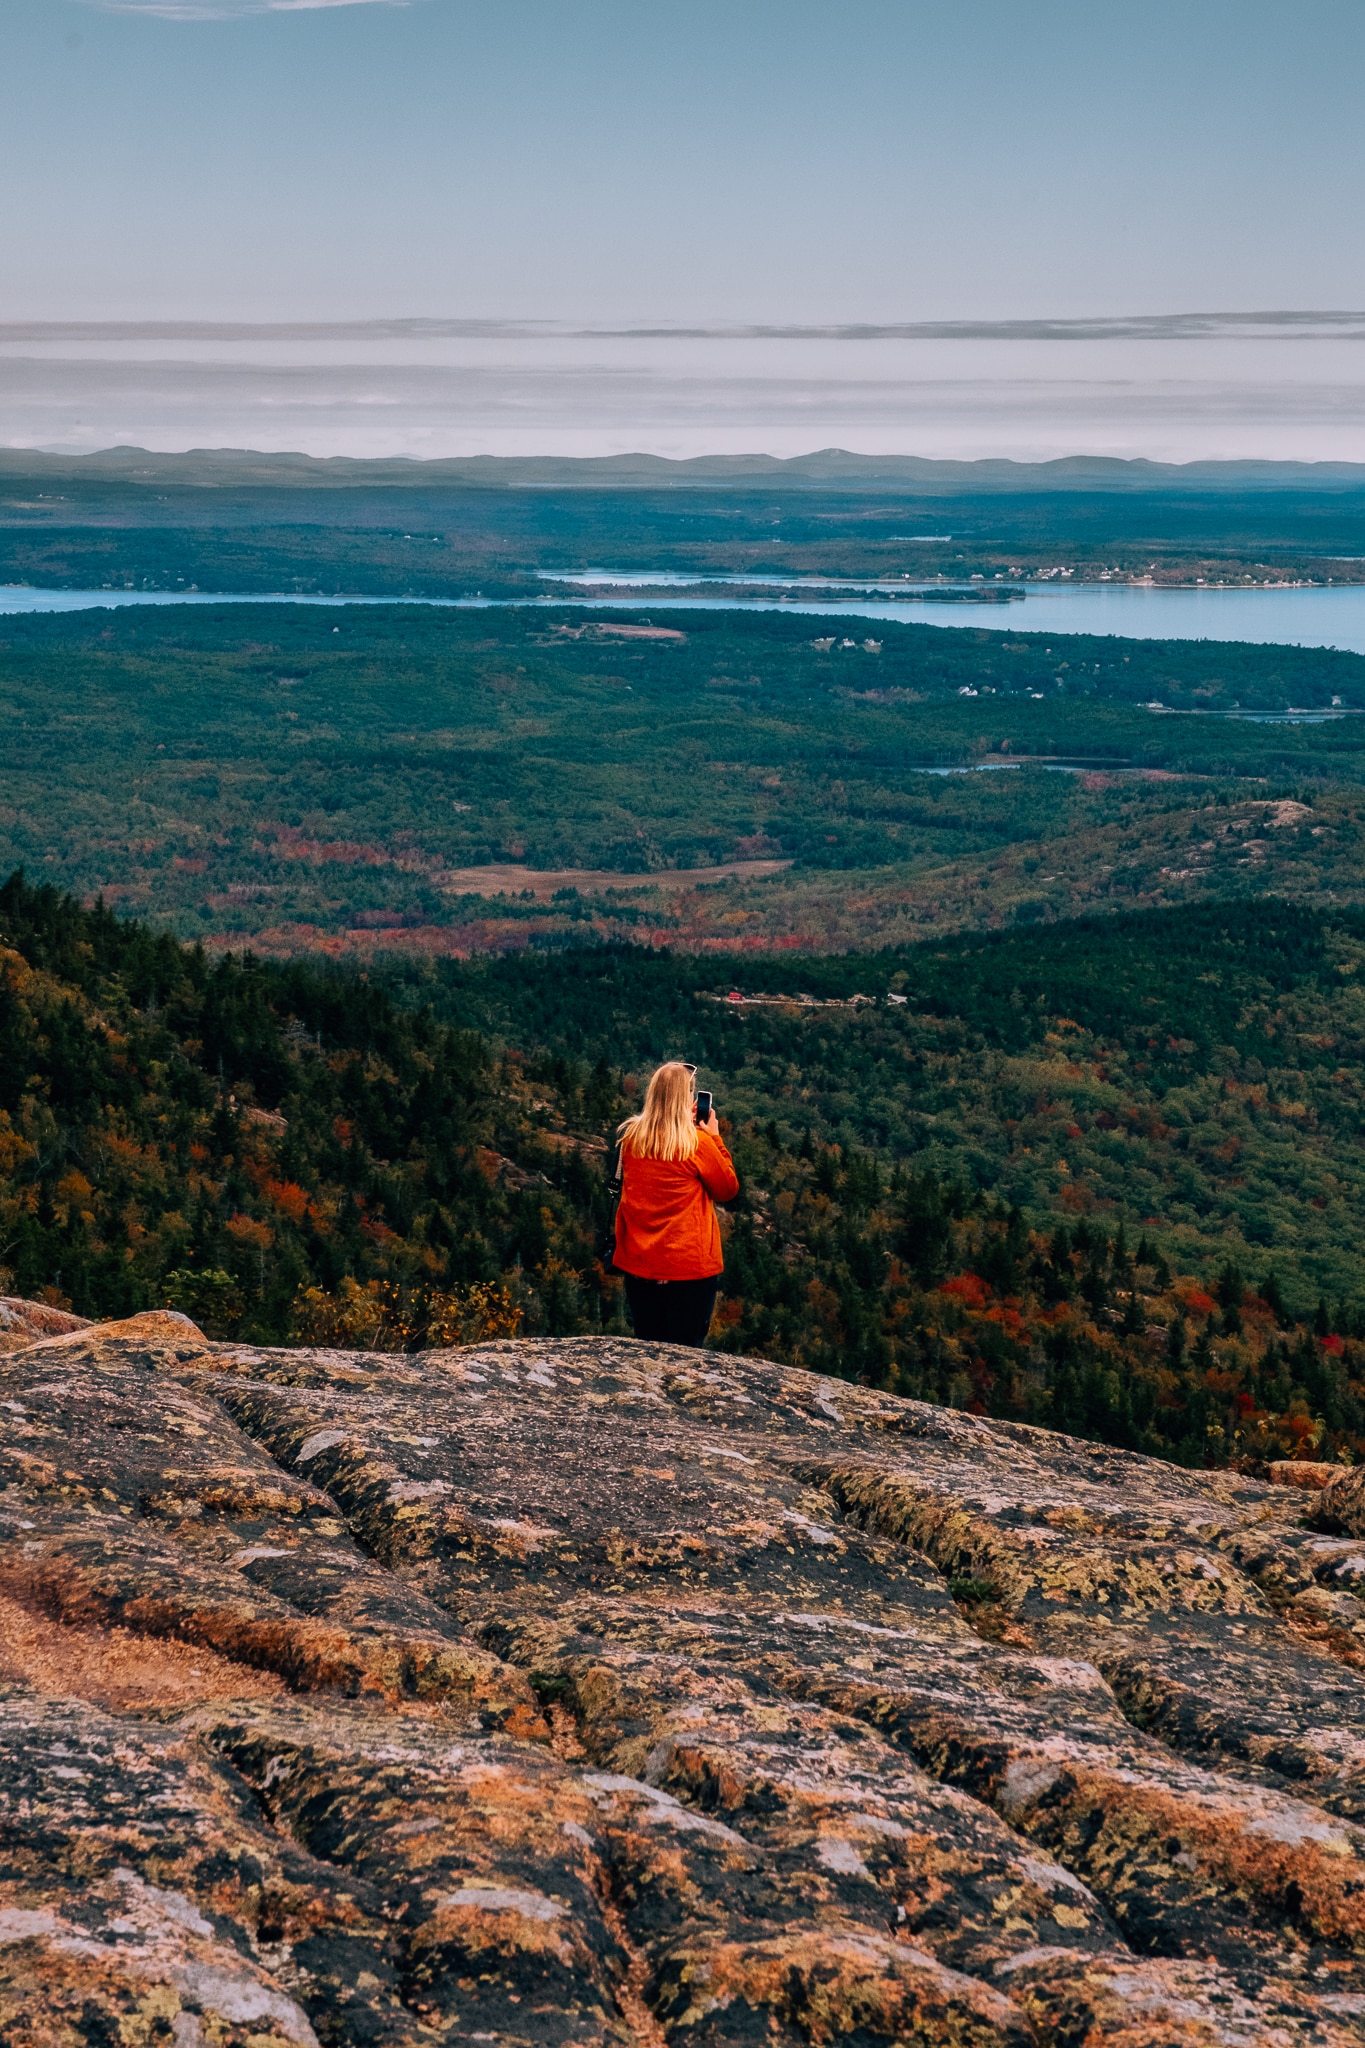 Woman standing atop a mountain looking out to the view with the coastline and many red and yellow trees for autumn